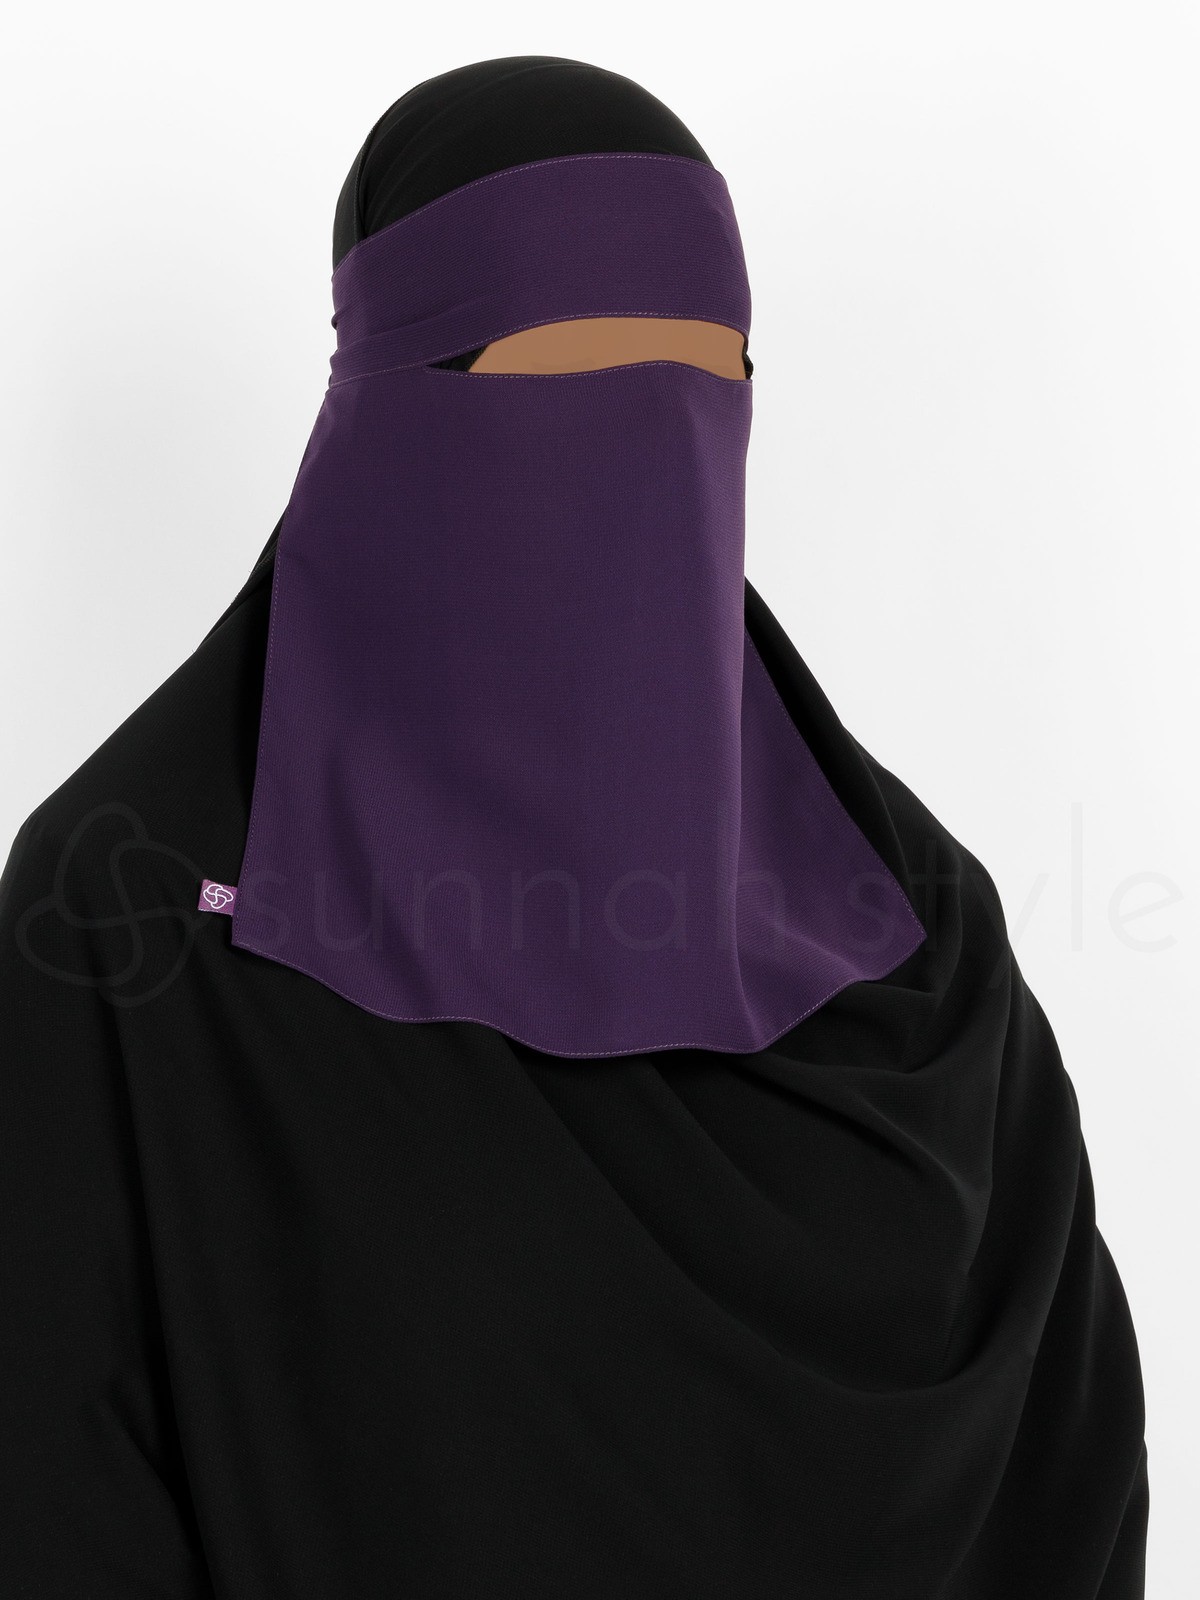 Sunnah Style - Short One Layer Niqab (Violet)